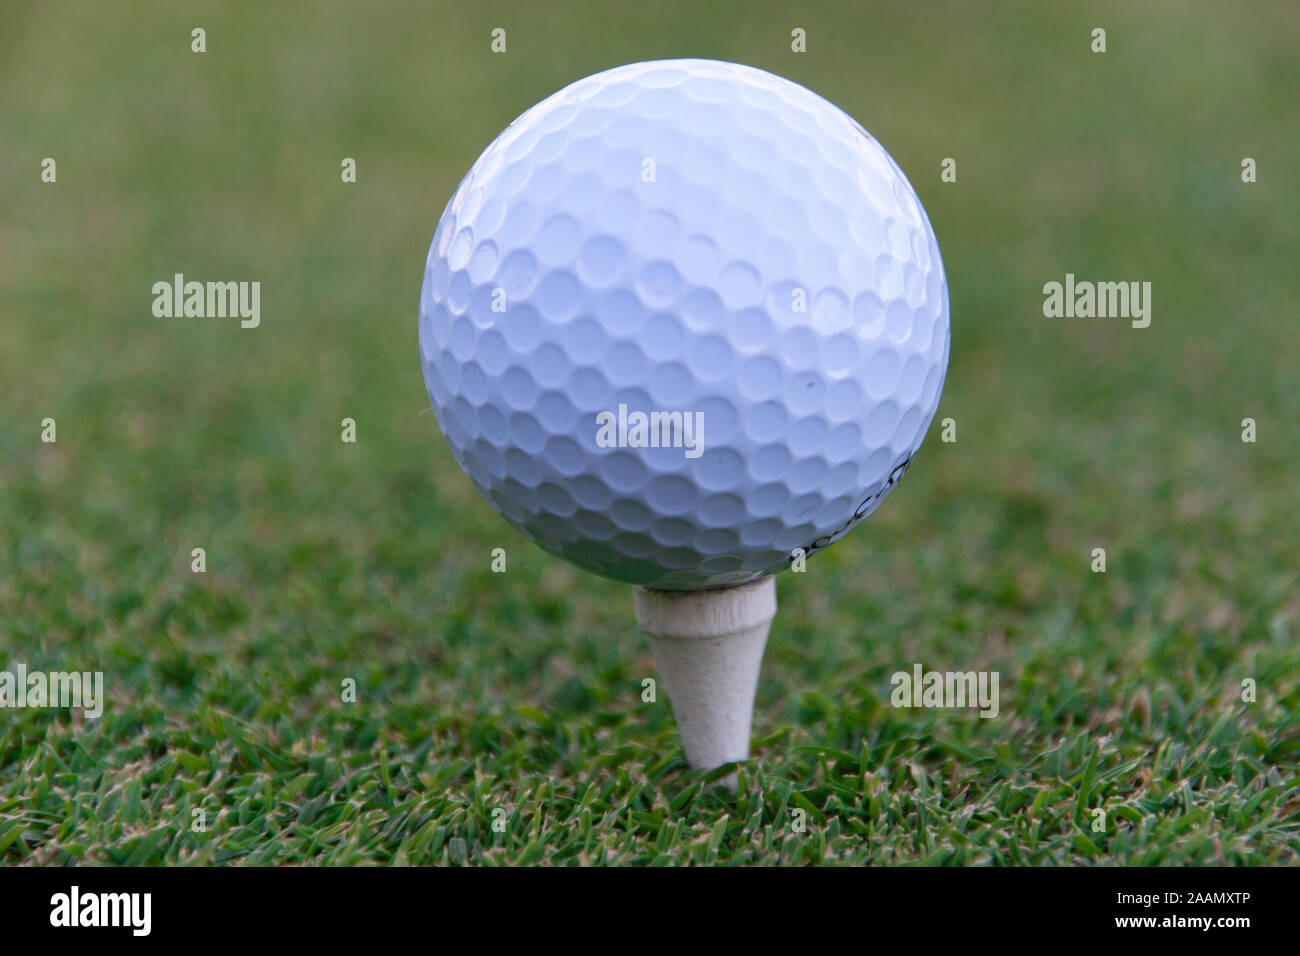 golf ball on tee pegs ready to play in the golf course Stock Photo